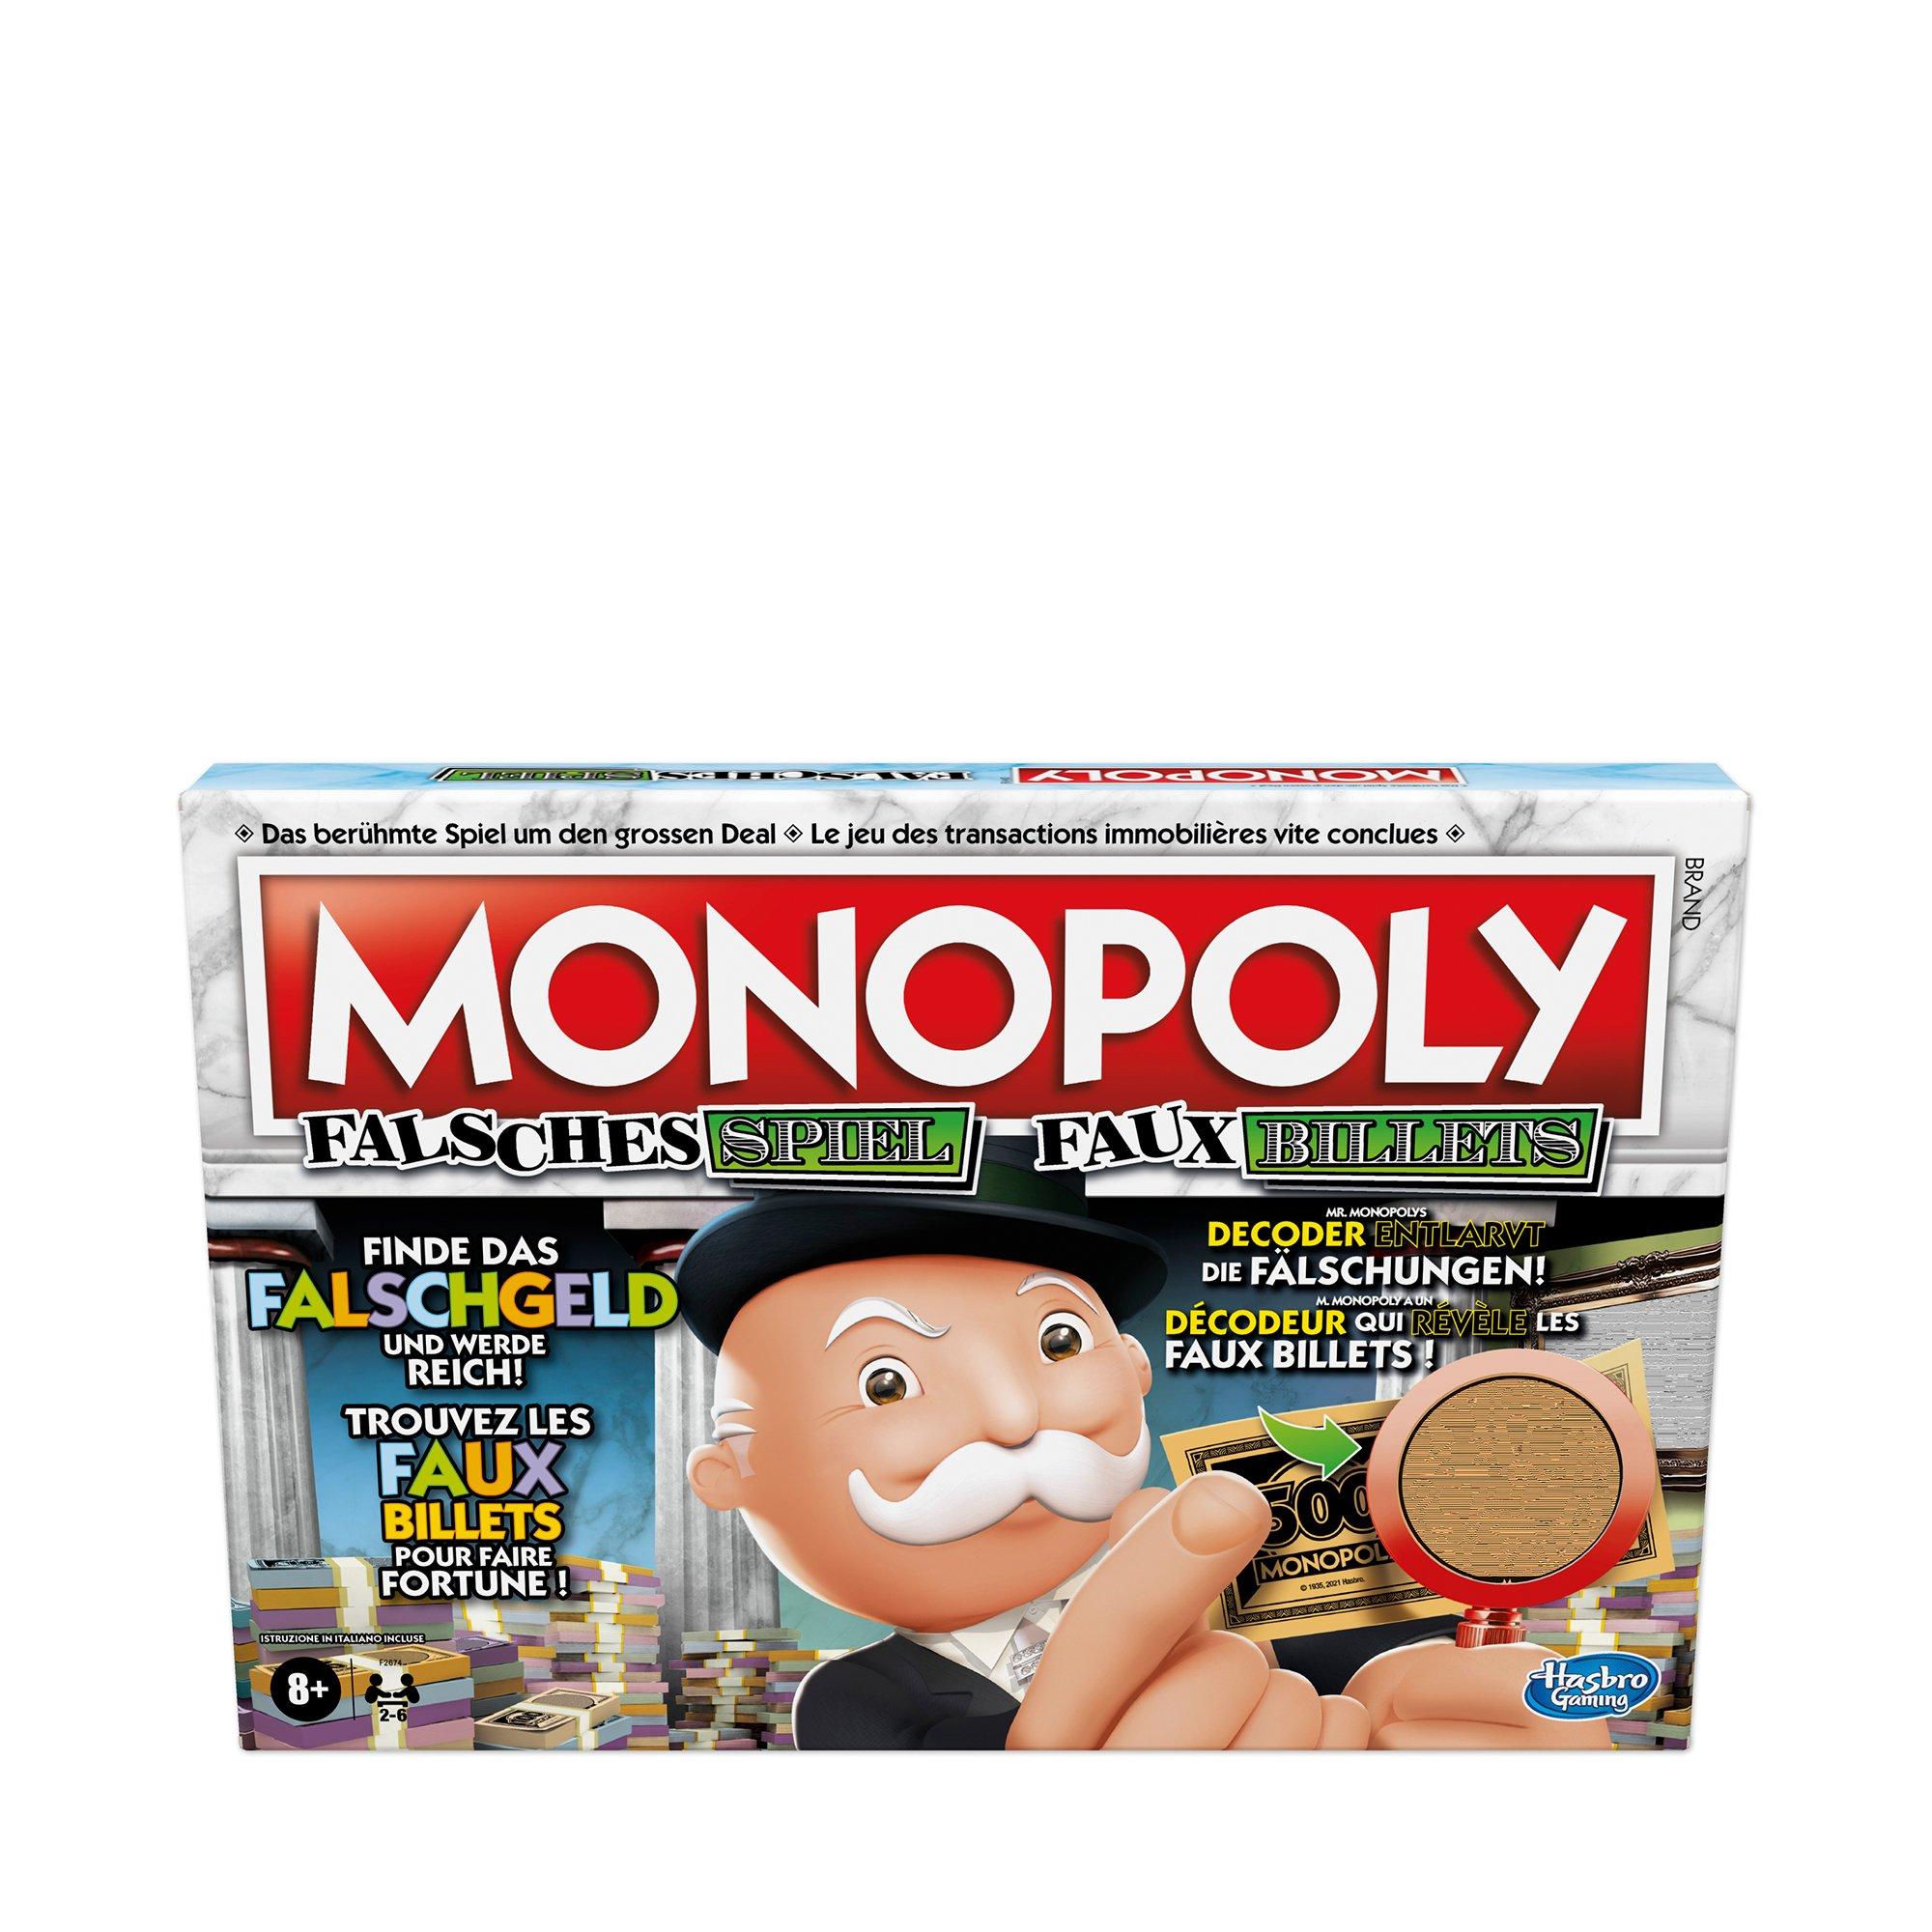 Image of MONOPOLY Falsches Spiel